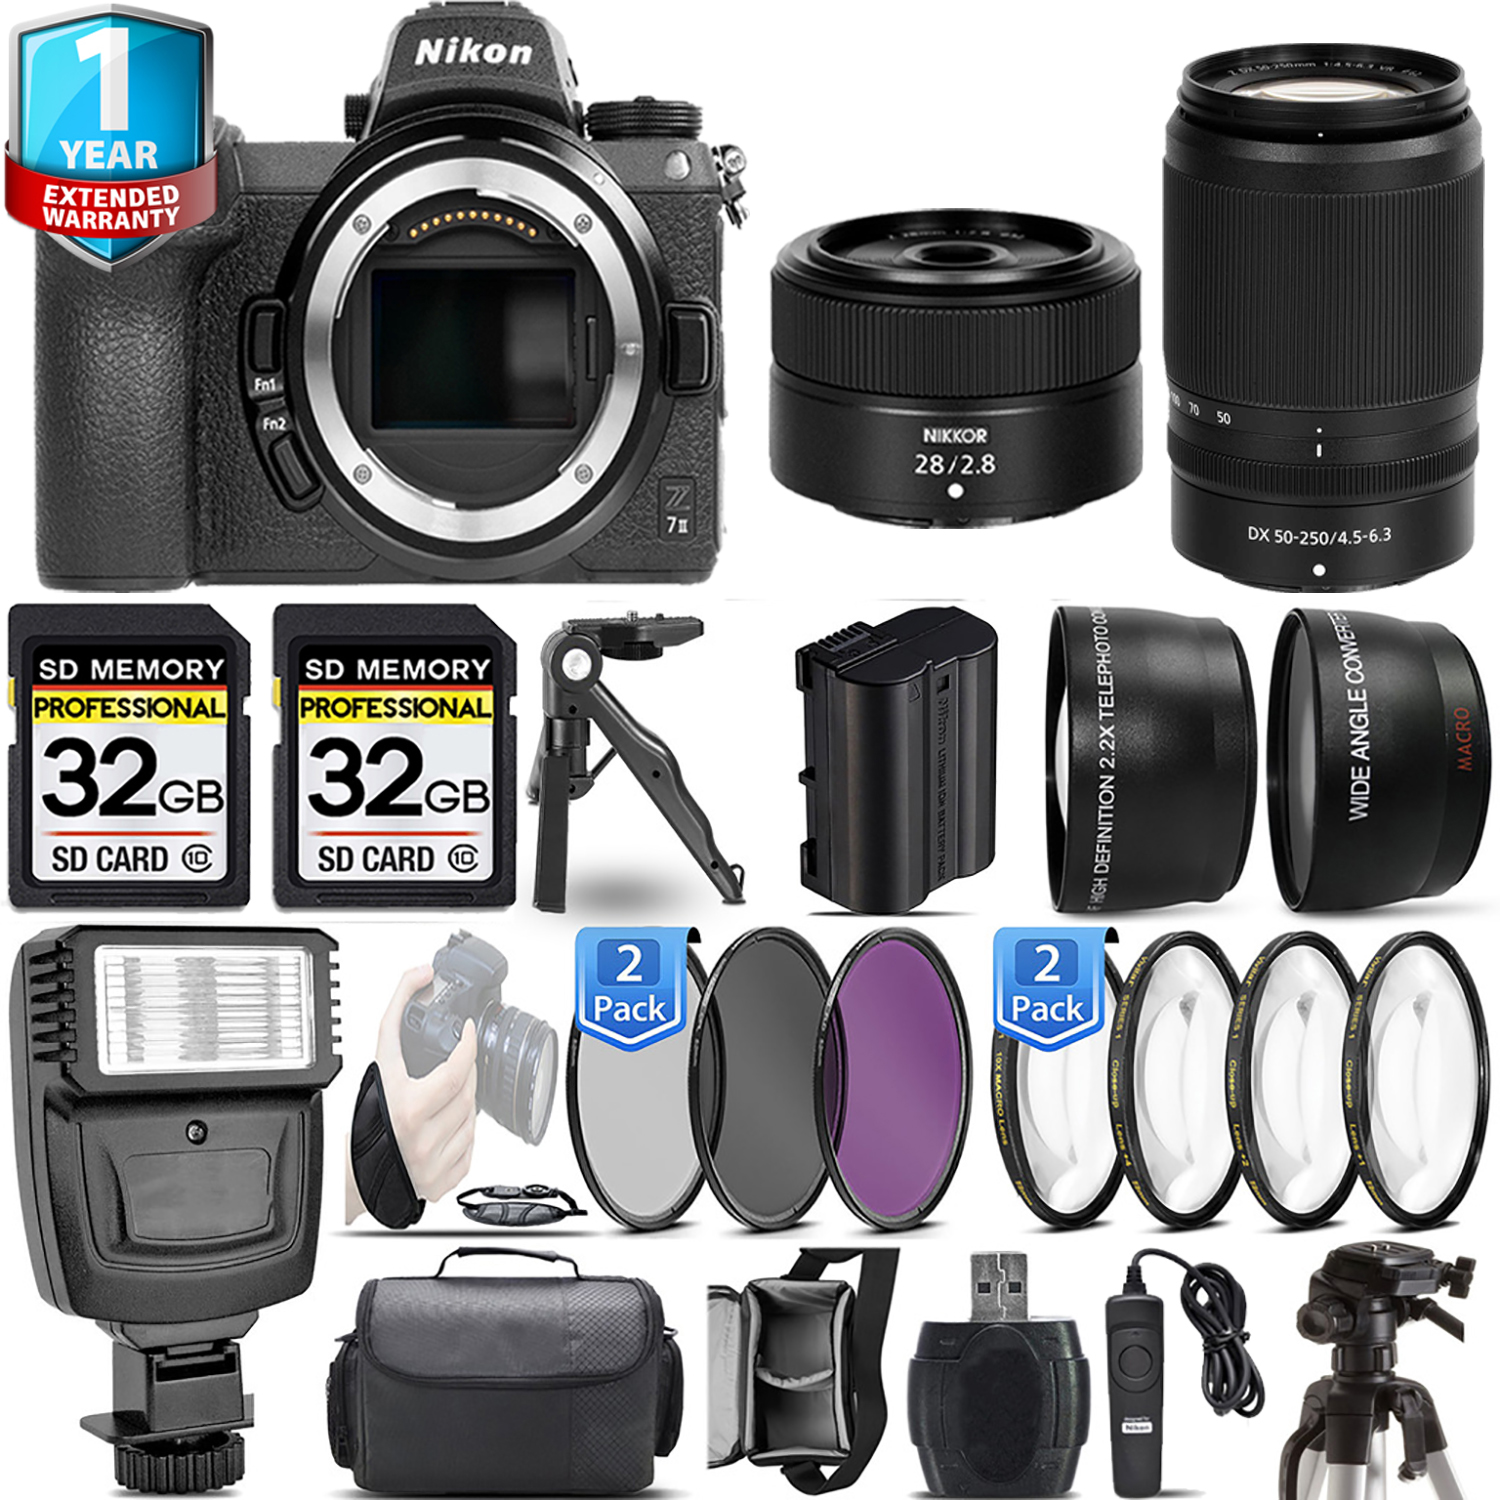 Z7 II Camera + 50-250mm + 28mm f/2.8 Lens + 1 Year Extended Warranty + 64GB Basic Kit *FREE SHIPPING*